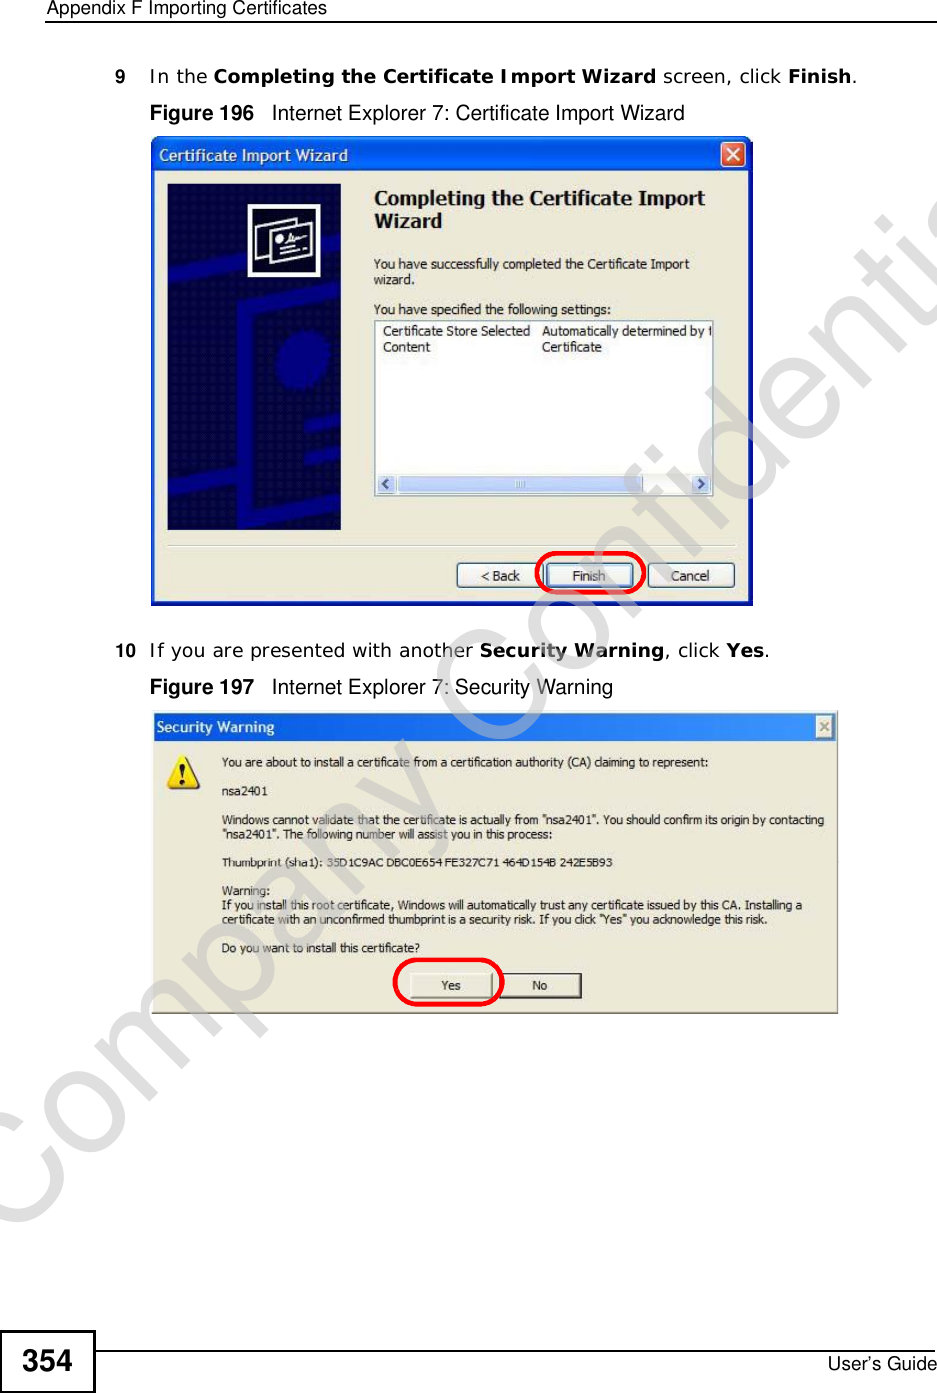 Appendix FImporting CertificatesUser’s Guide3549In the Completing the Certificate Import Wizard screen, click Finish.Figure 196   Internet Explorer 7: Certificate Import Wizard10 If you are presented with another Security Warning, click Yes.Figure 197   Internet Explorer 7: Security WarningCompany Confidential